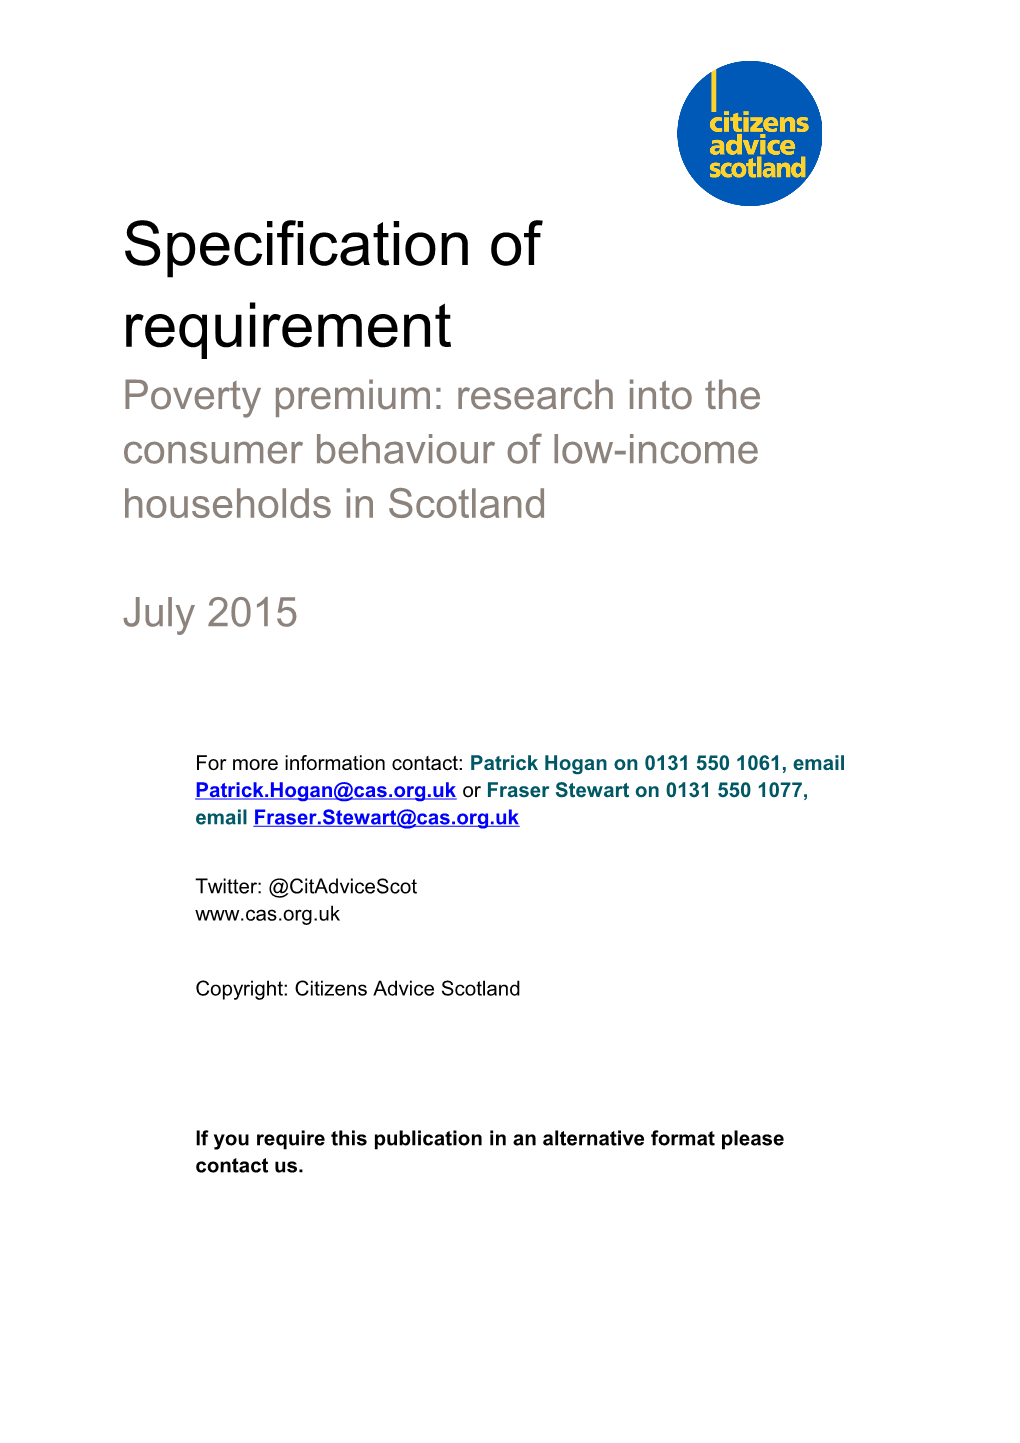 Poverty Premium: Research Into the Consumer Behaviour of Low-Income Households in Scotland